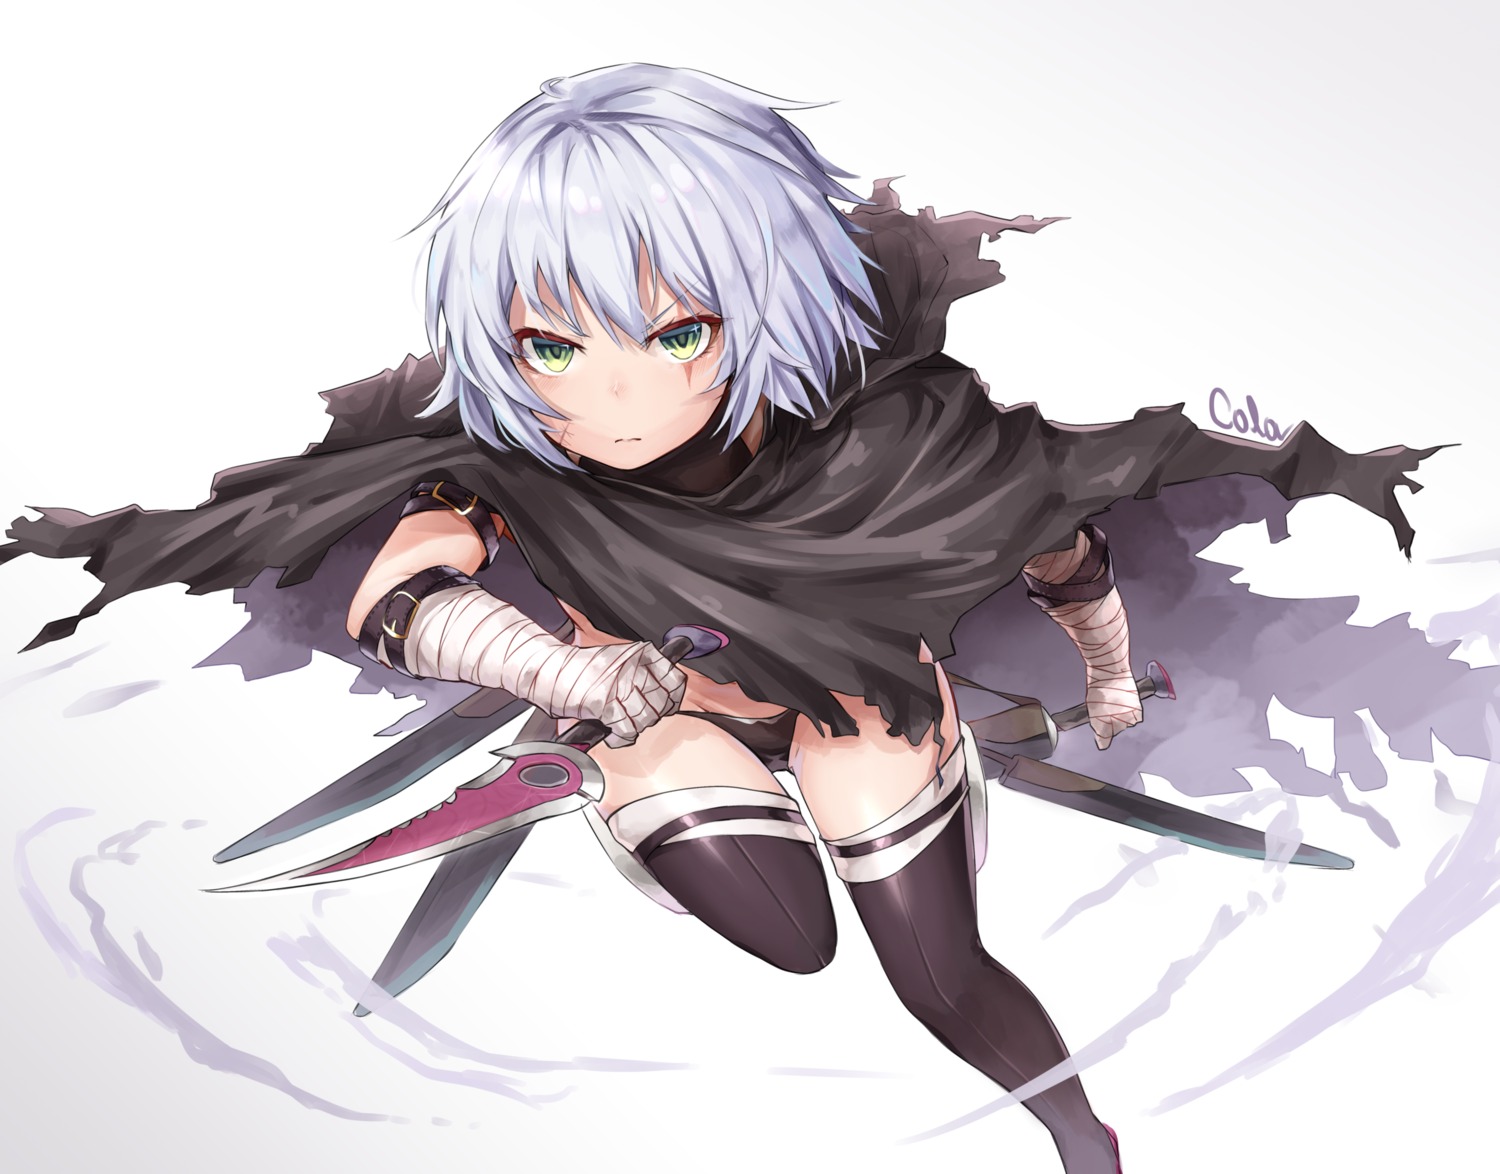 bandages black_cola fate/apocrypha fate/grand_order fate/stay_night jack_the_ripper pantsu thighhighs weapon